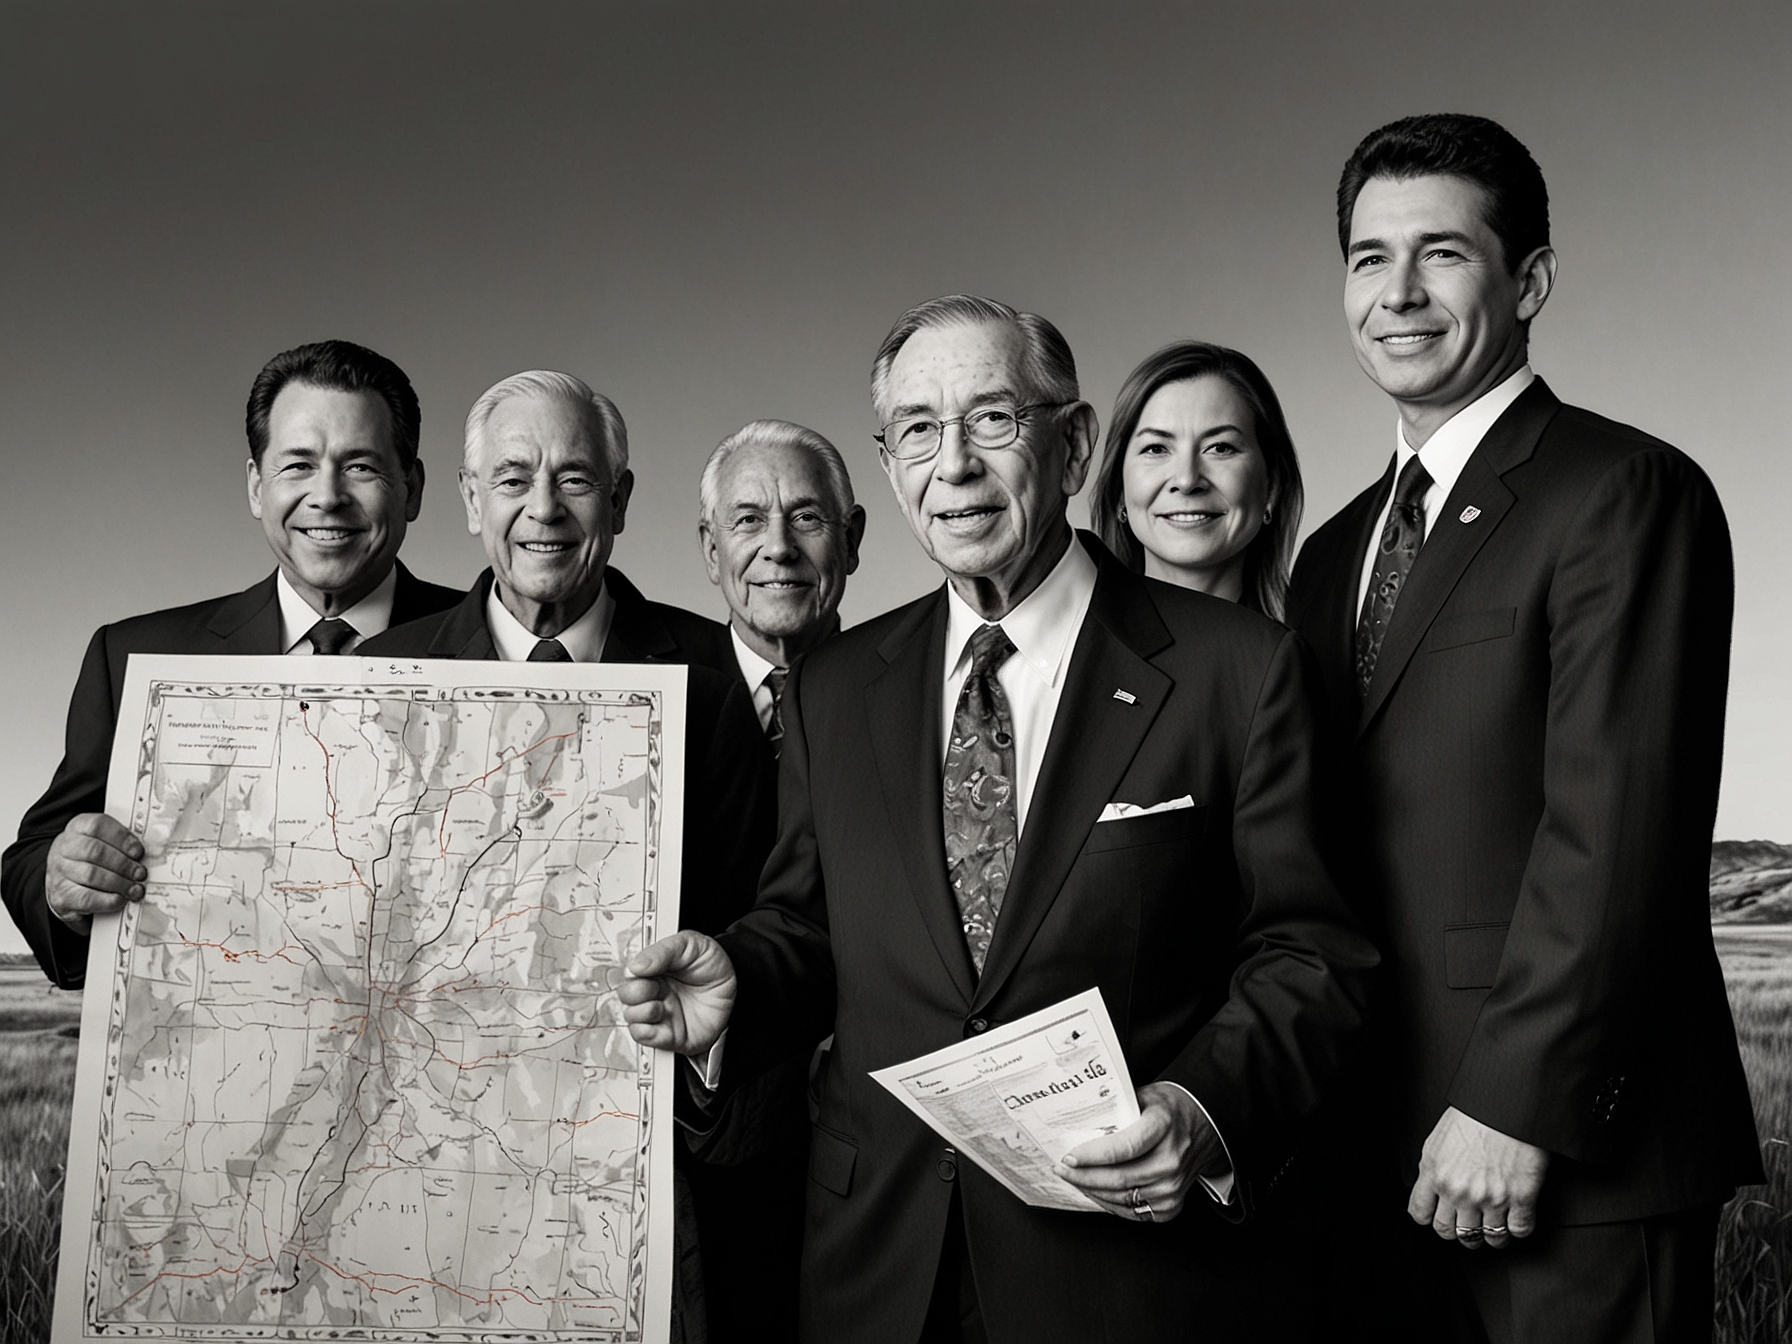 Senator Chuck Grassley stands with tribal leaders, holding a map of the 1,600 acres of land being returned to the Winnebago Tribe of Nebraska, celebrating the Senate's historic decision.